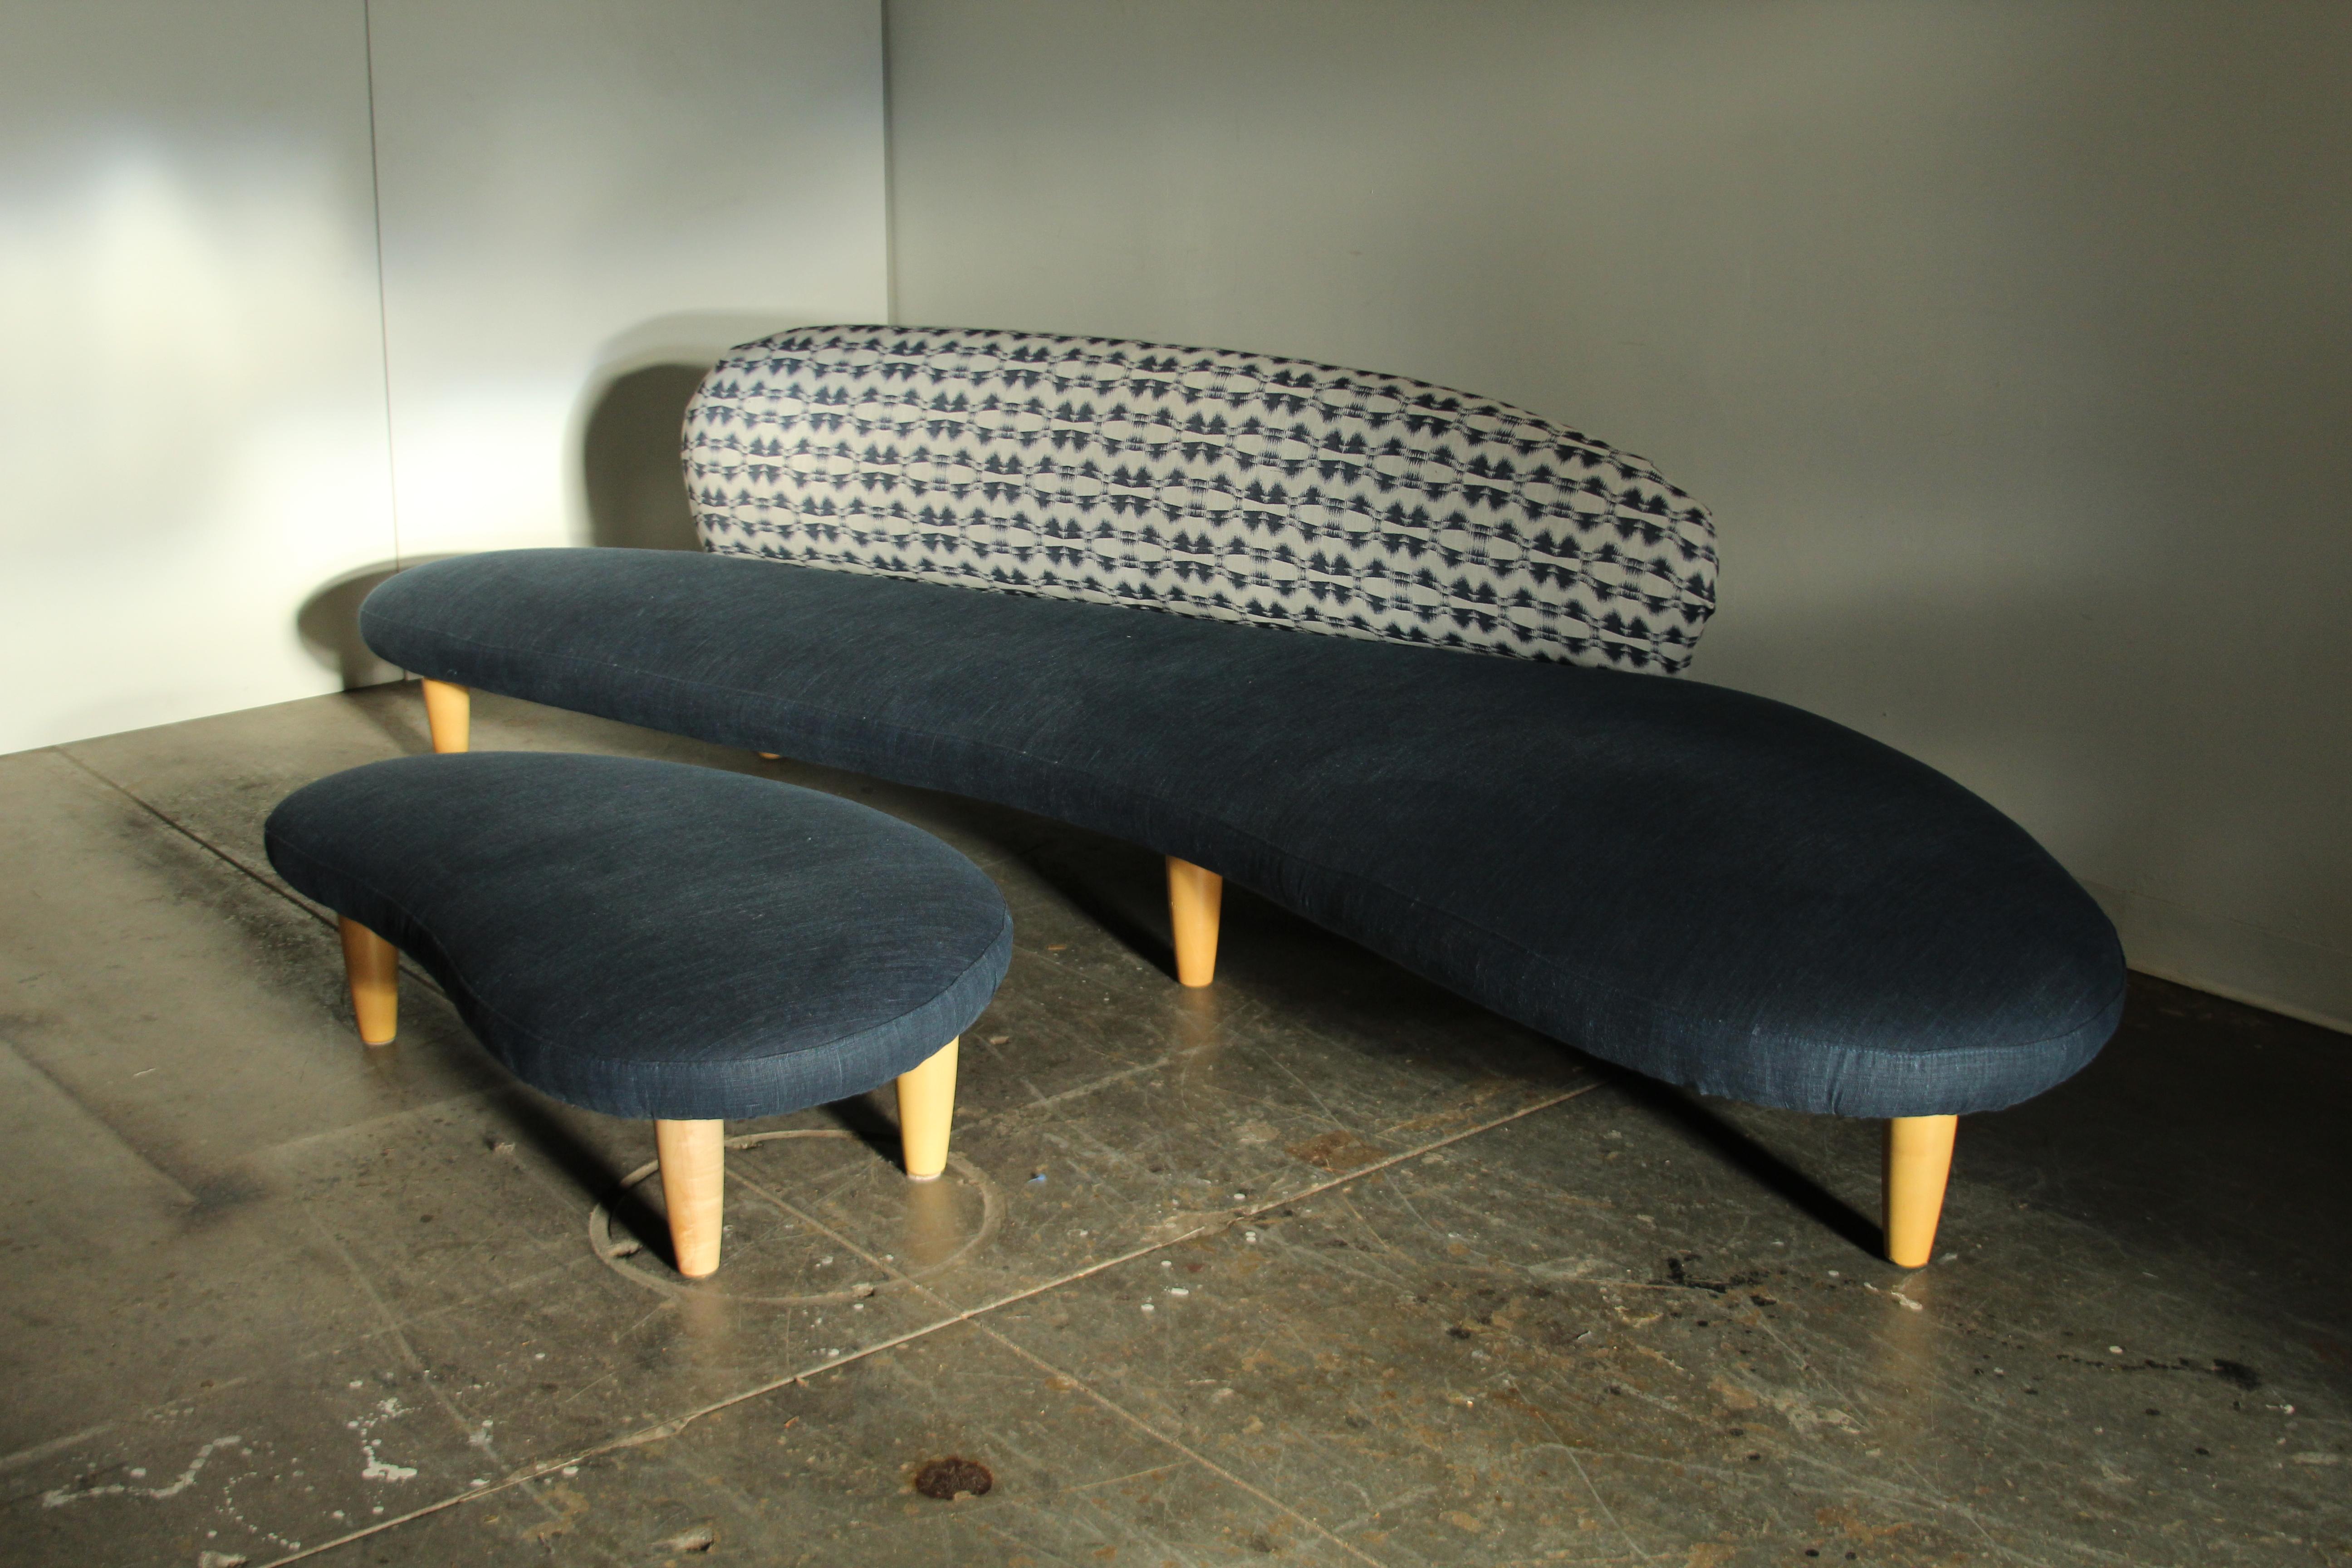 A sublime Freeform sofa by Isamu Noguchi, produced by Vitra circa 2002. This is a very early production example: the 33rd piece produced, to be exact. This long, low, and organic sofa has been newly reupholstered. The seat of the sofa is covered in